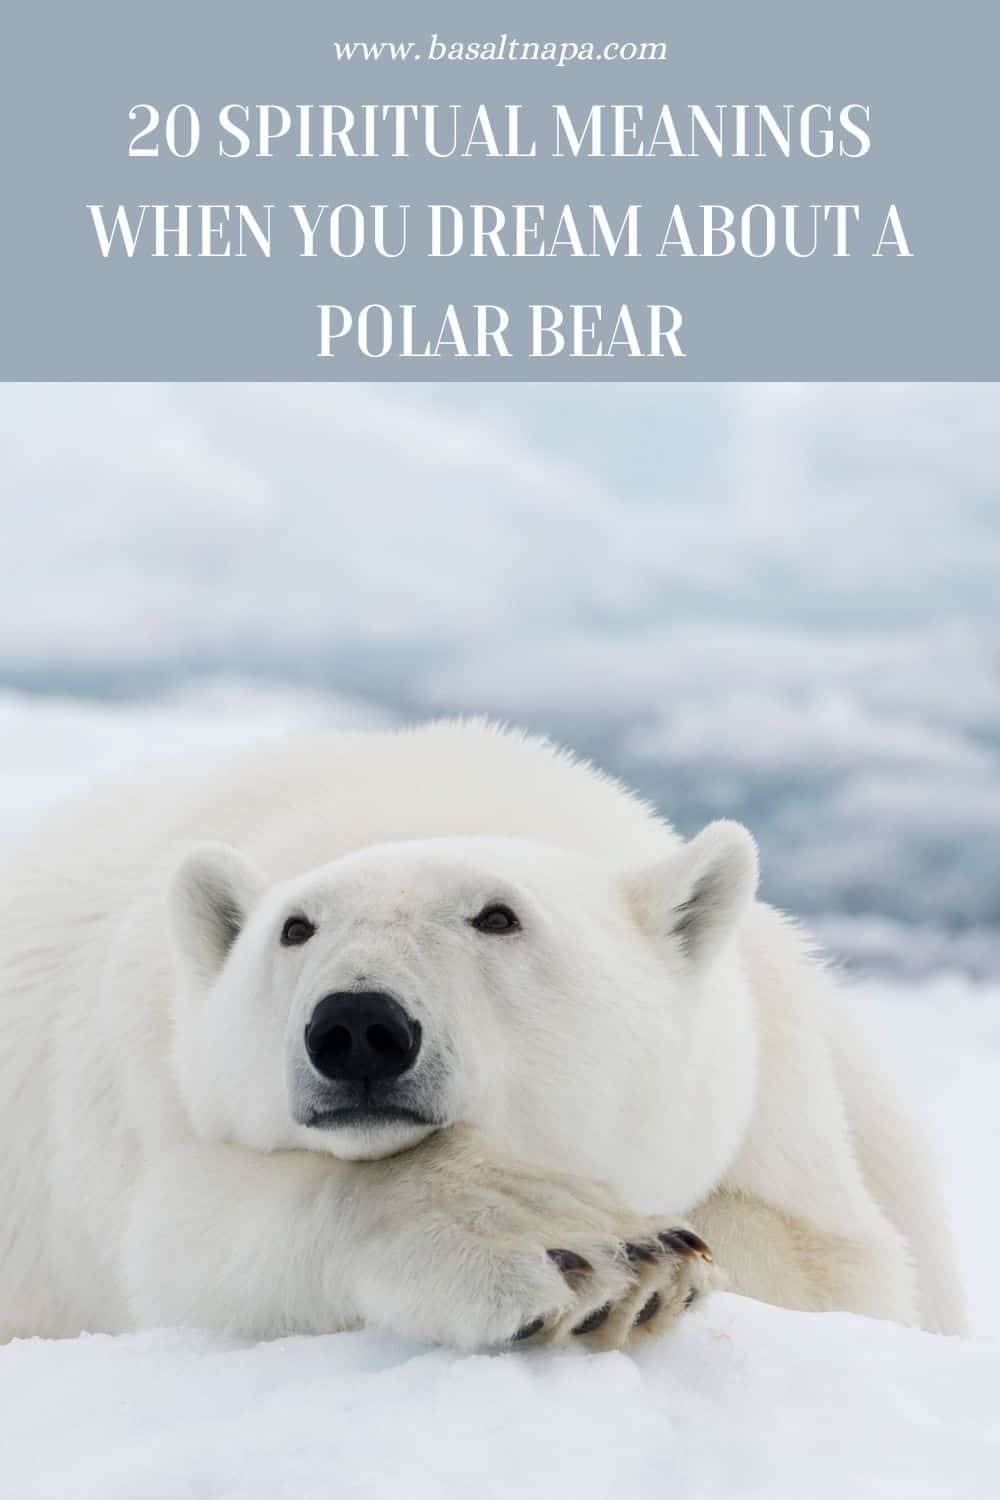 Different Meanings of Dreaming about Polar Bears